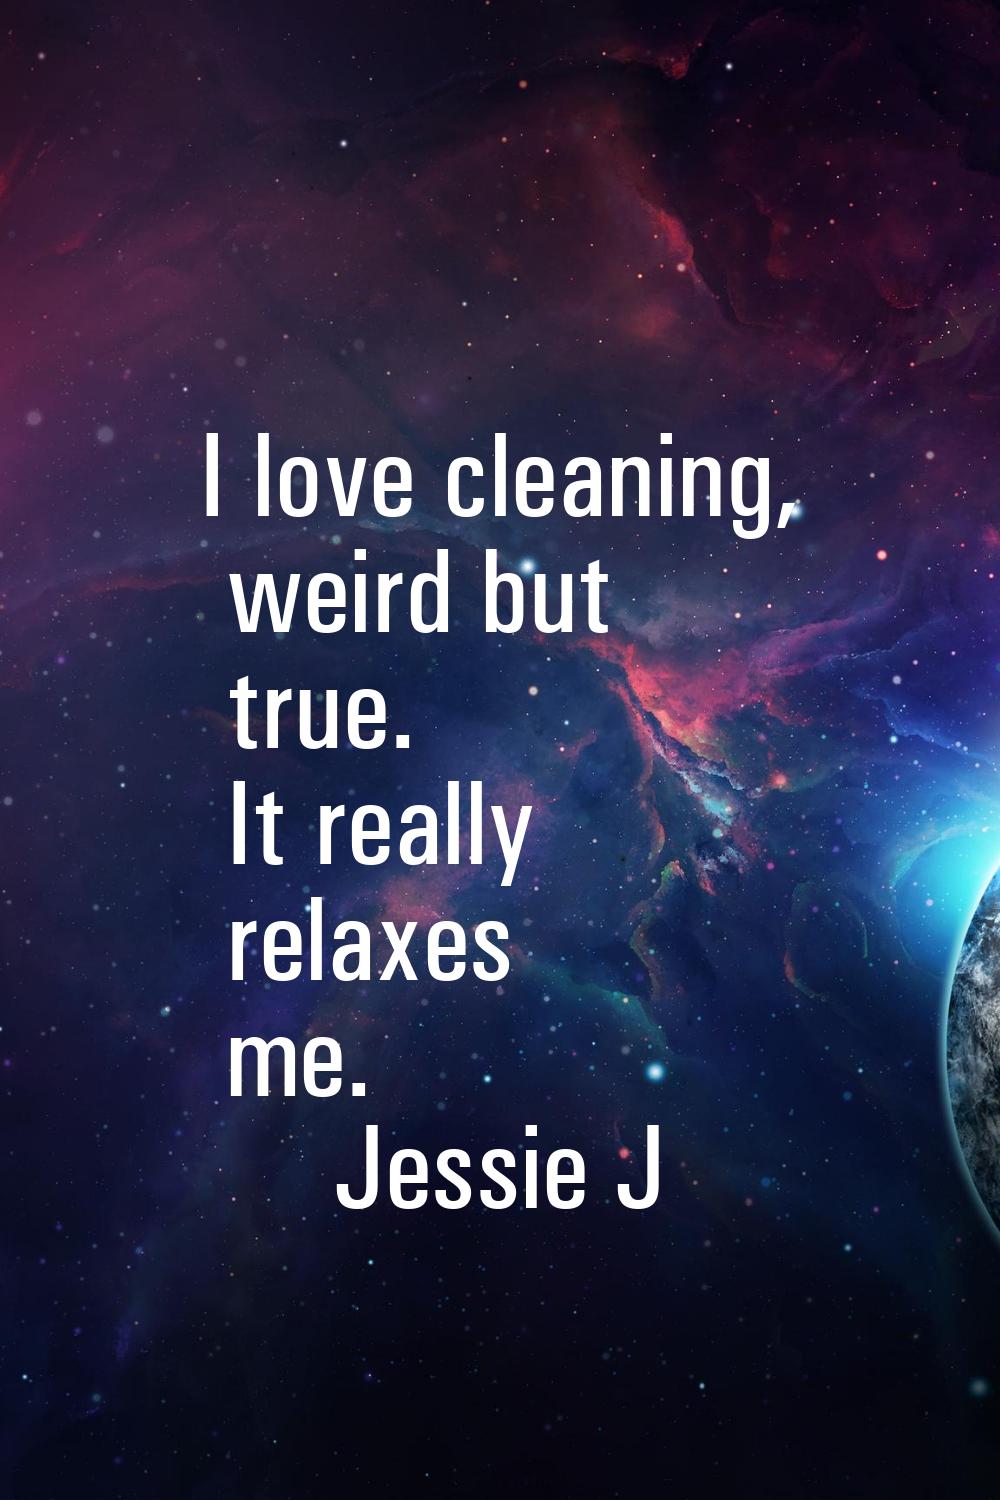 I love cleaning, weird but true. It really relaxes me.